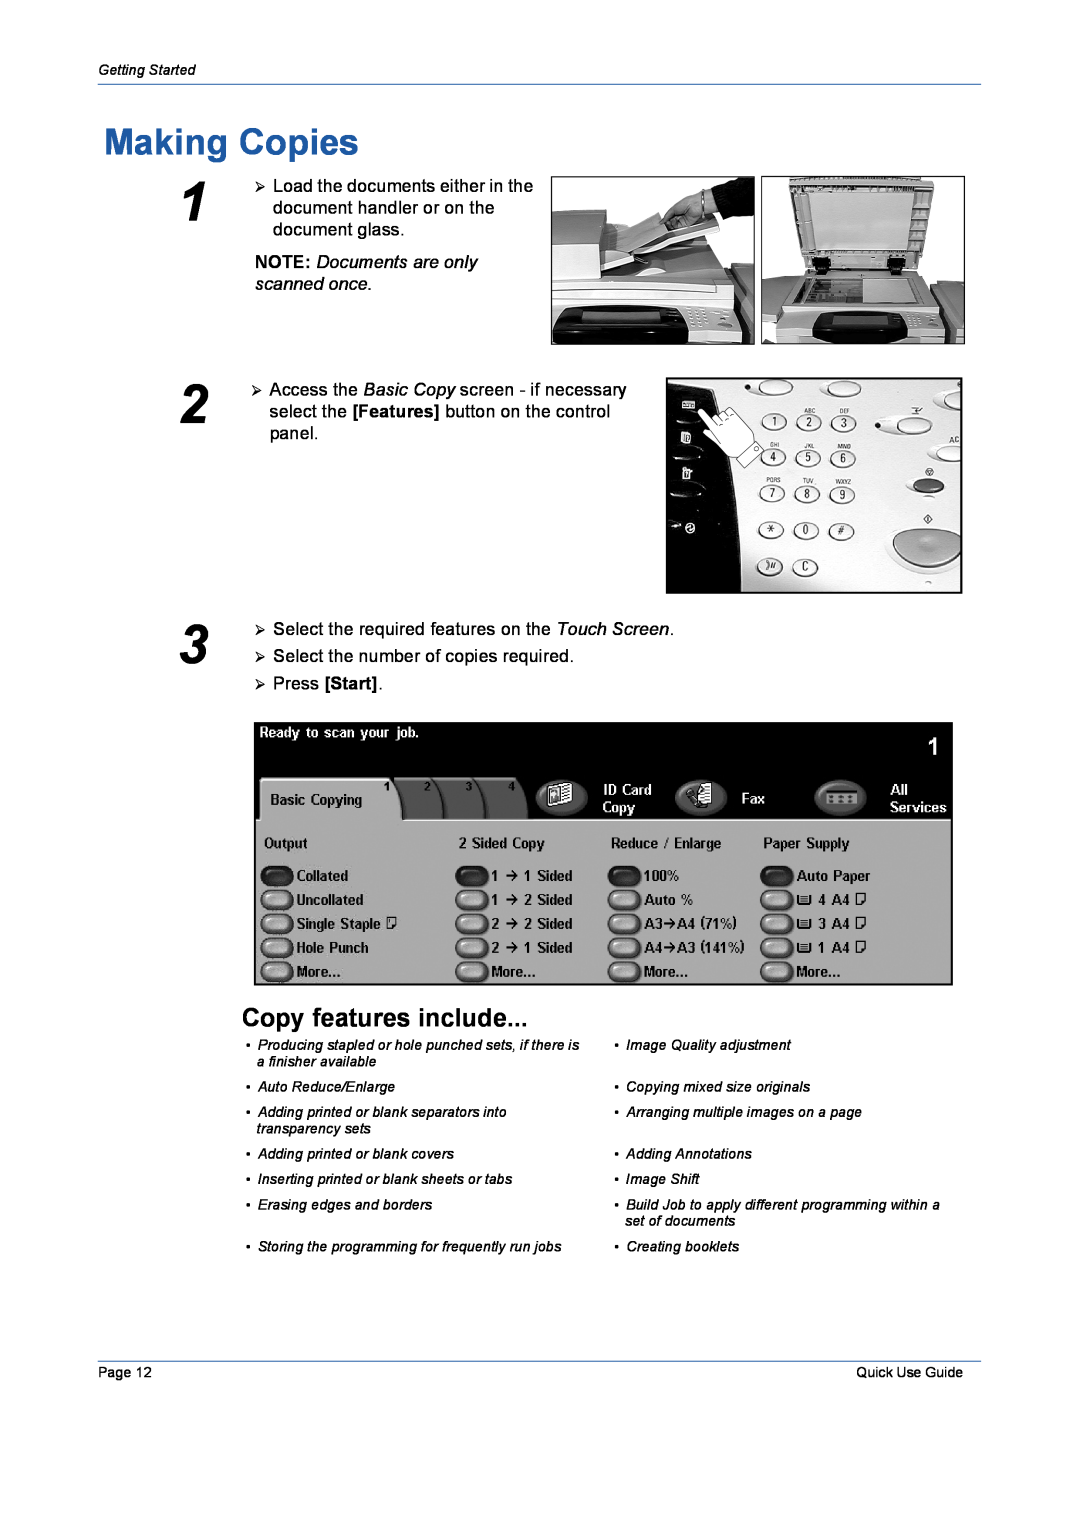 Xerox 5632 manual Making Copies, Copy features include 